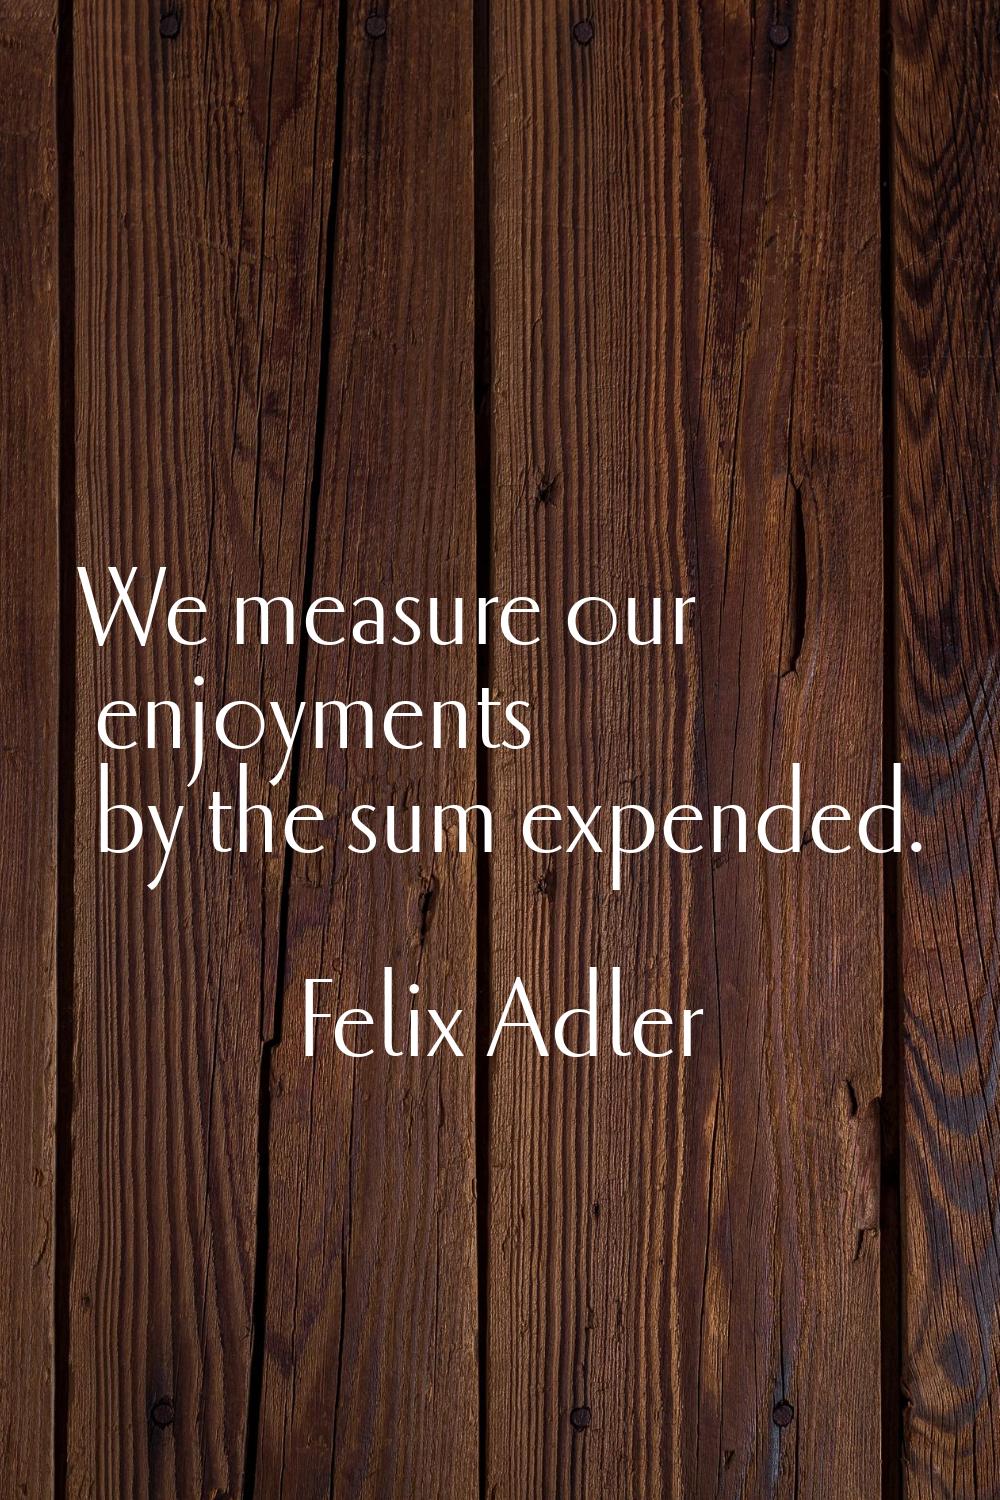 We measure our enjoyments by the sum expended.